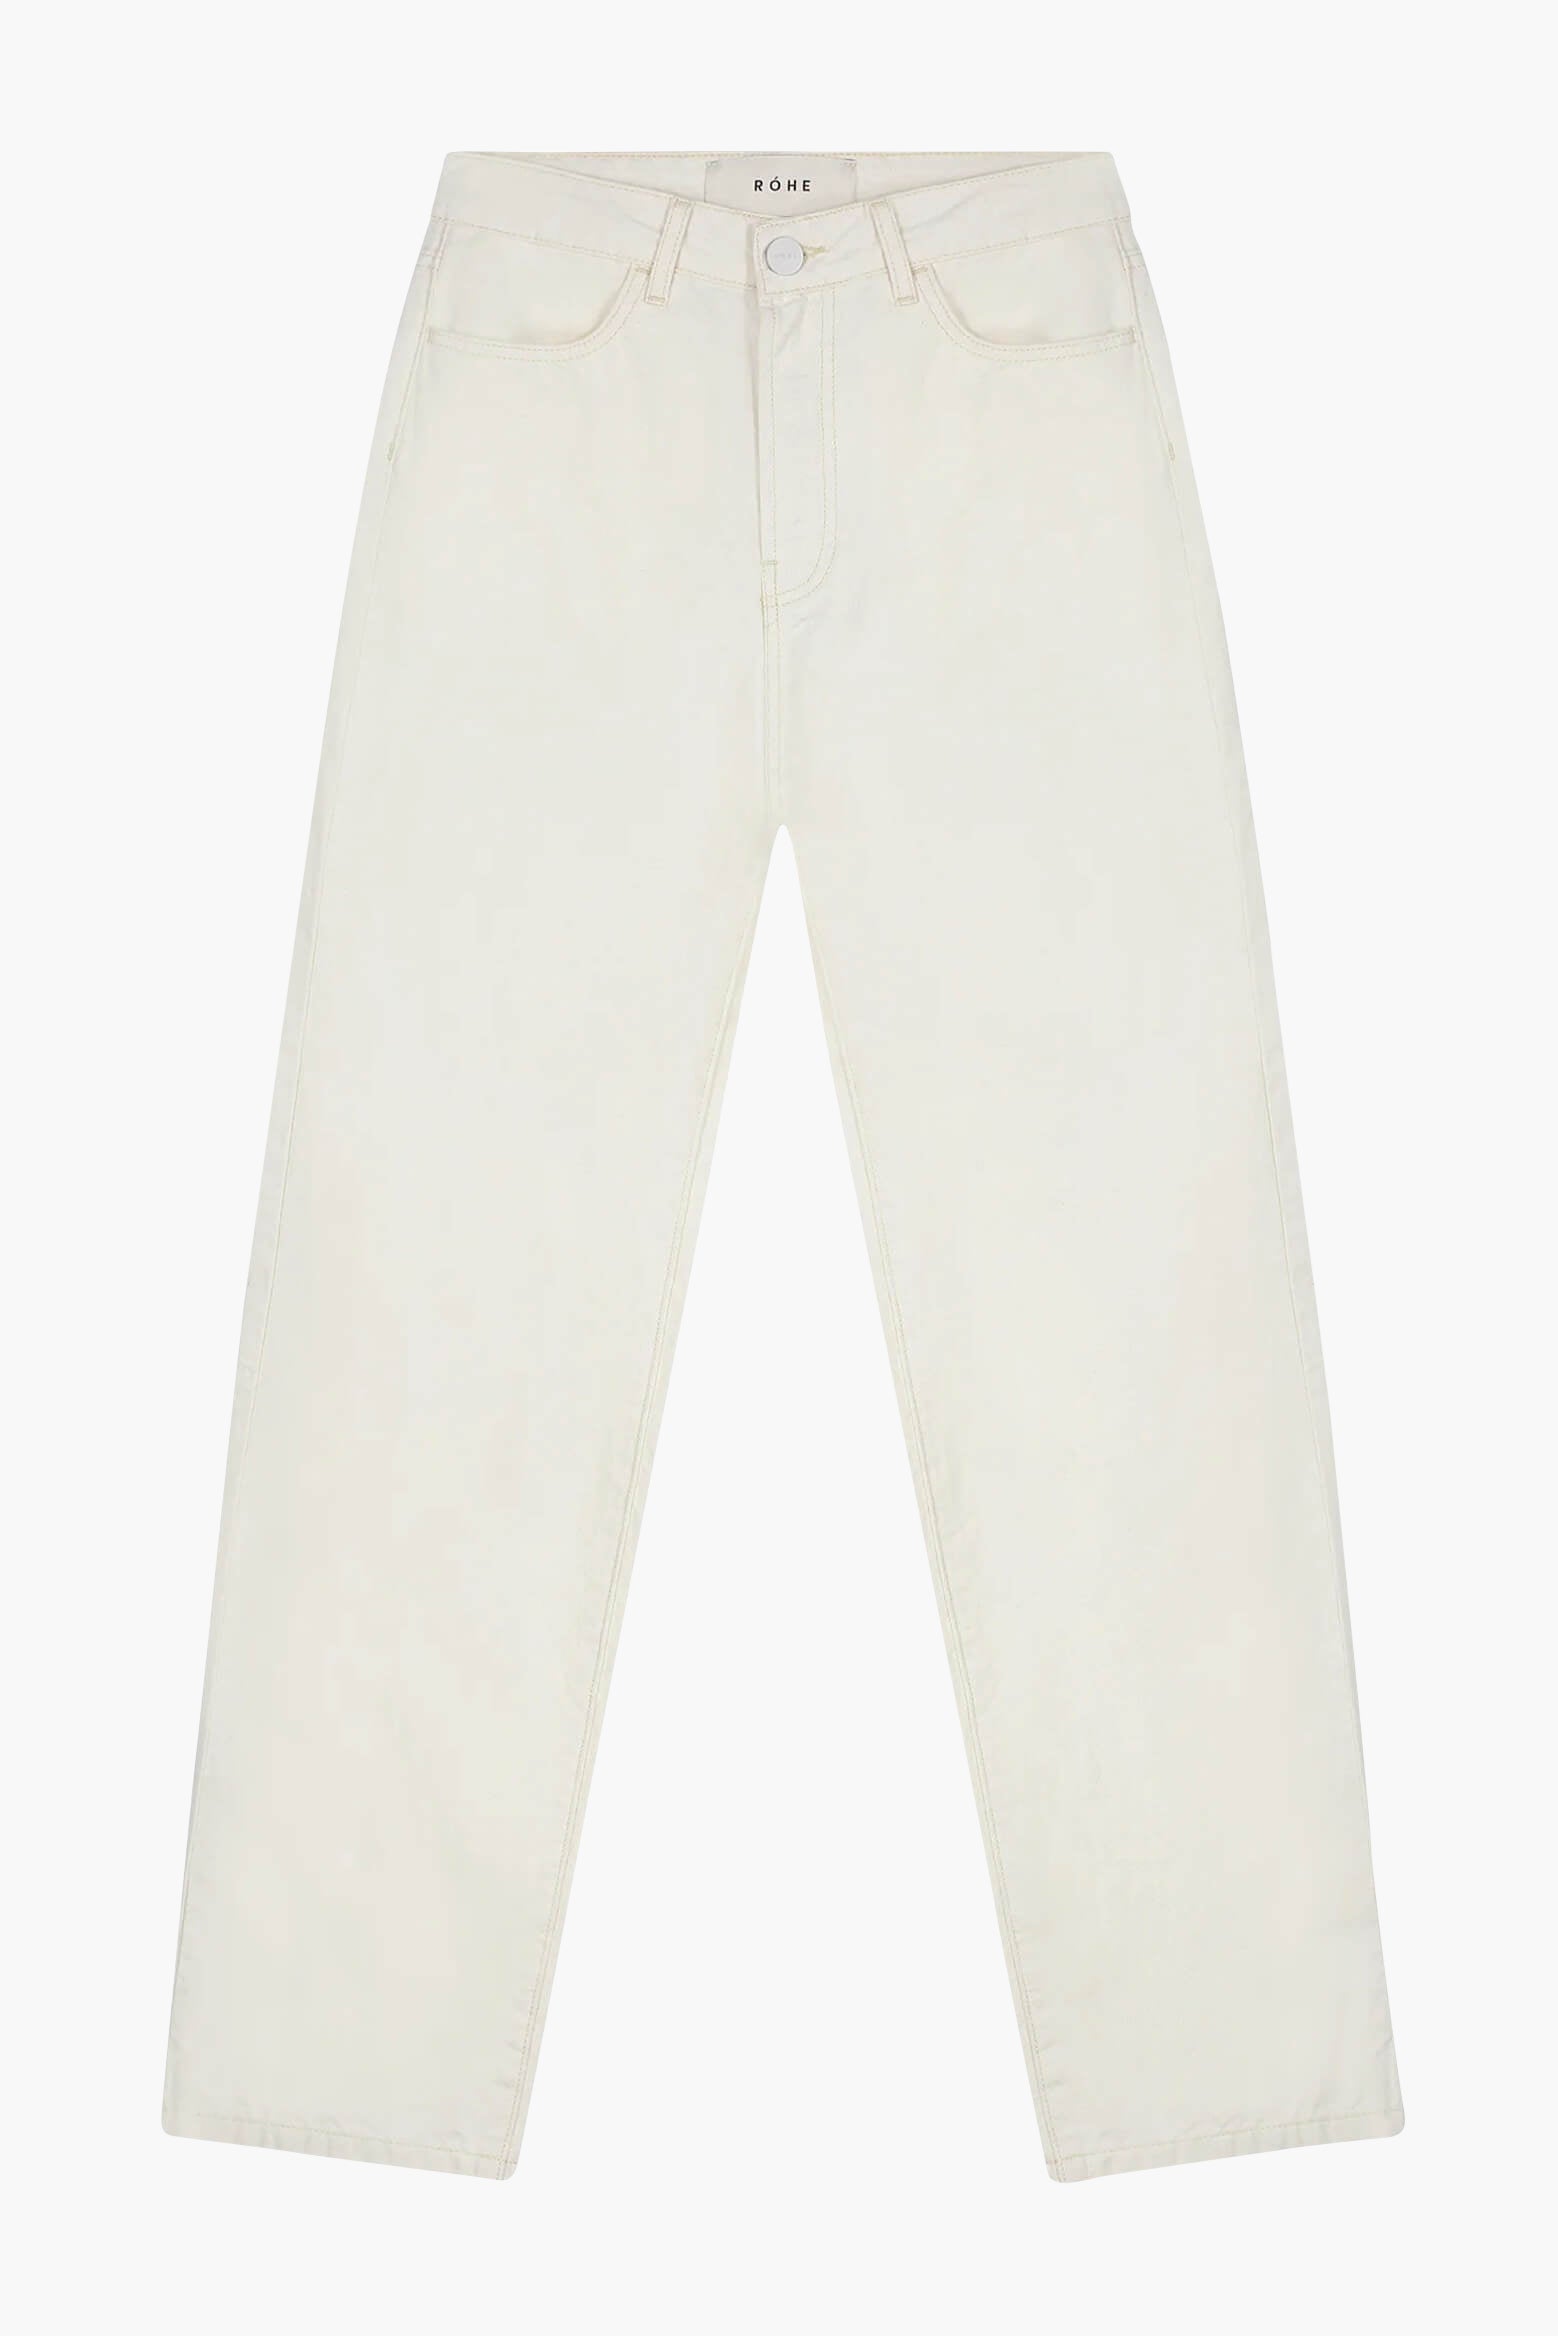 Rohe Relaxed Fit Denim in Raw Cotton available at TNT The New Trend Australia. Free shipping on orders over $300 AUD.